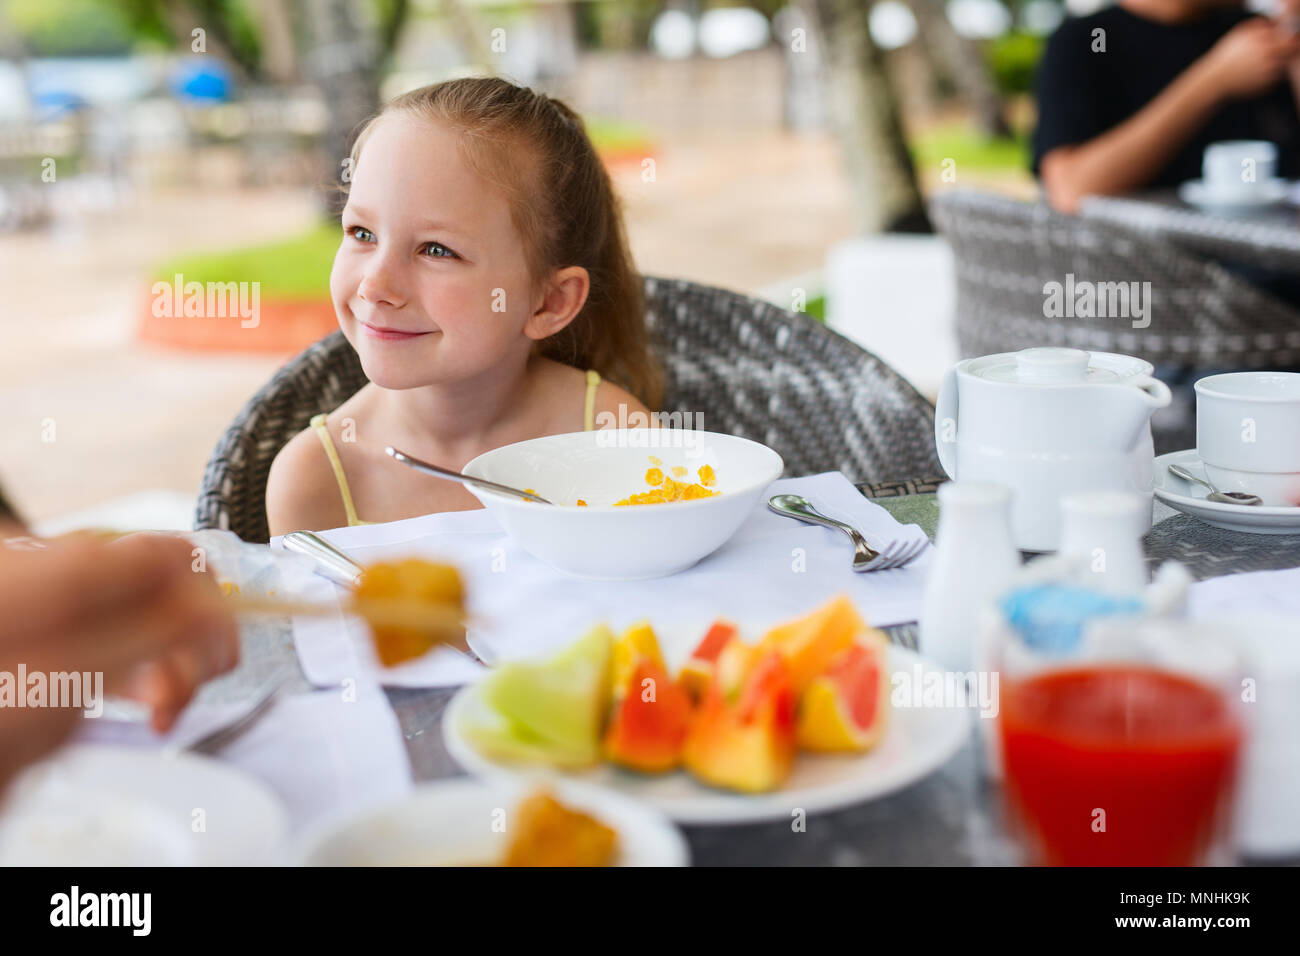 Adorable little girl eating cereal with milk for breakfast in restaurant Stock Photo